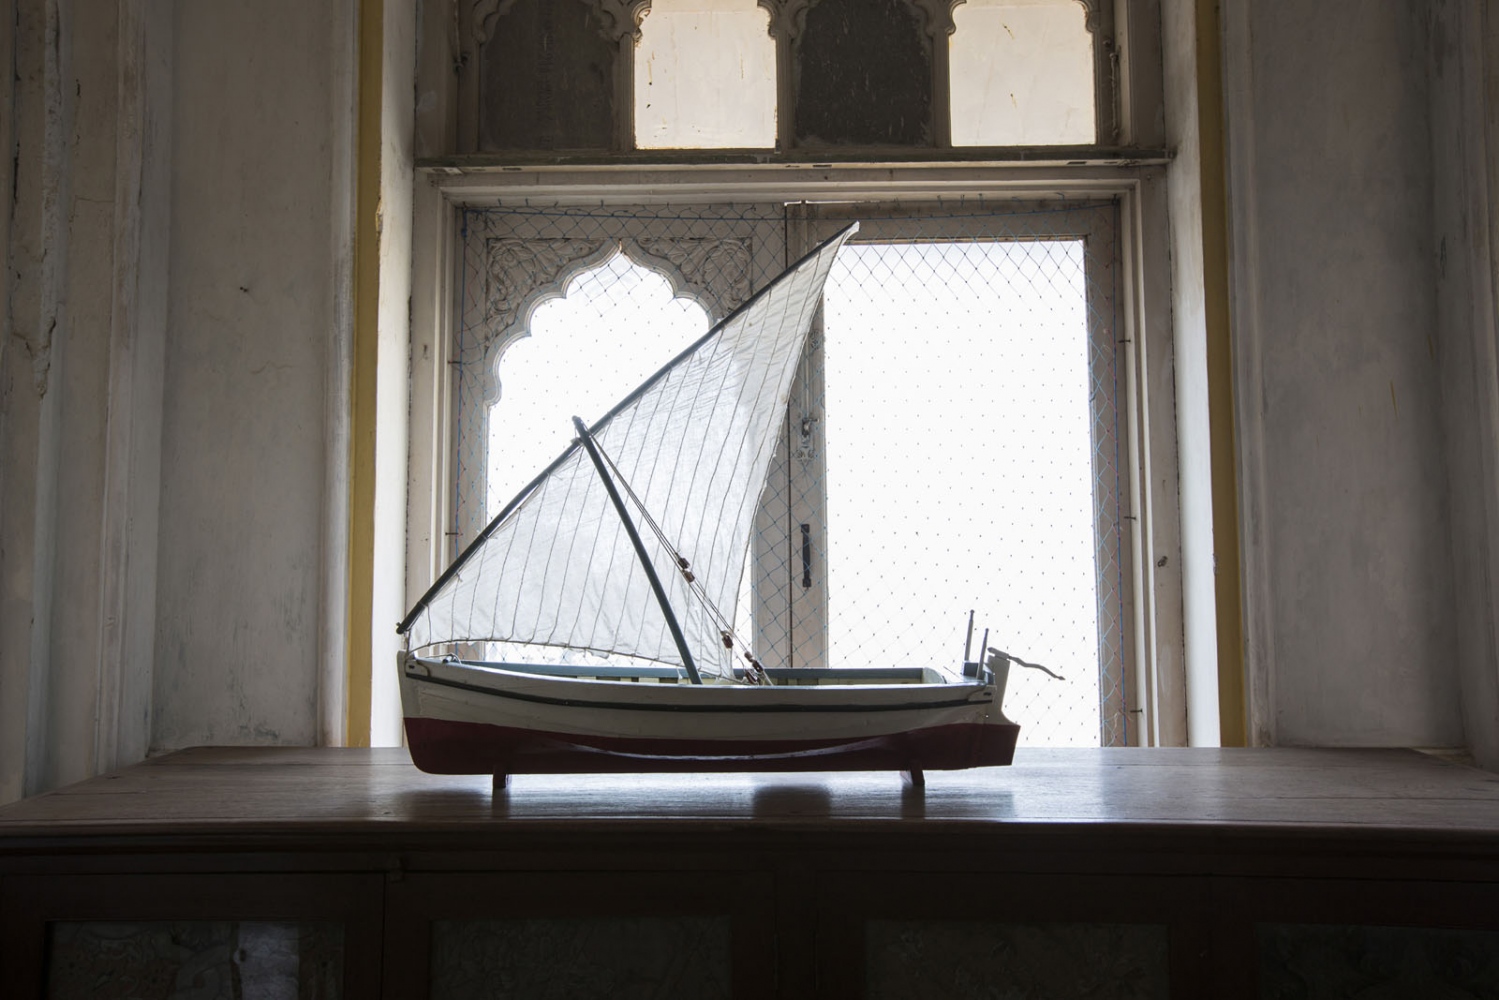 SOUTH ASIA'S AFRICAN DIASPORA -                 The model of a dhow boat built by a...